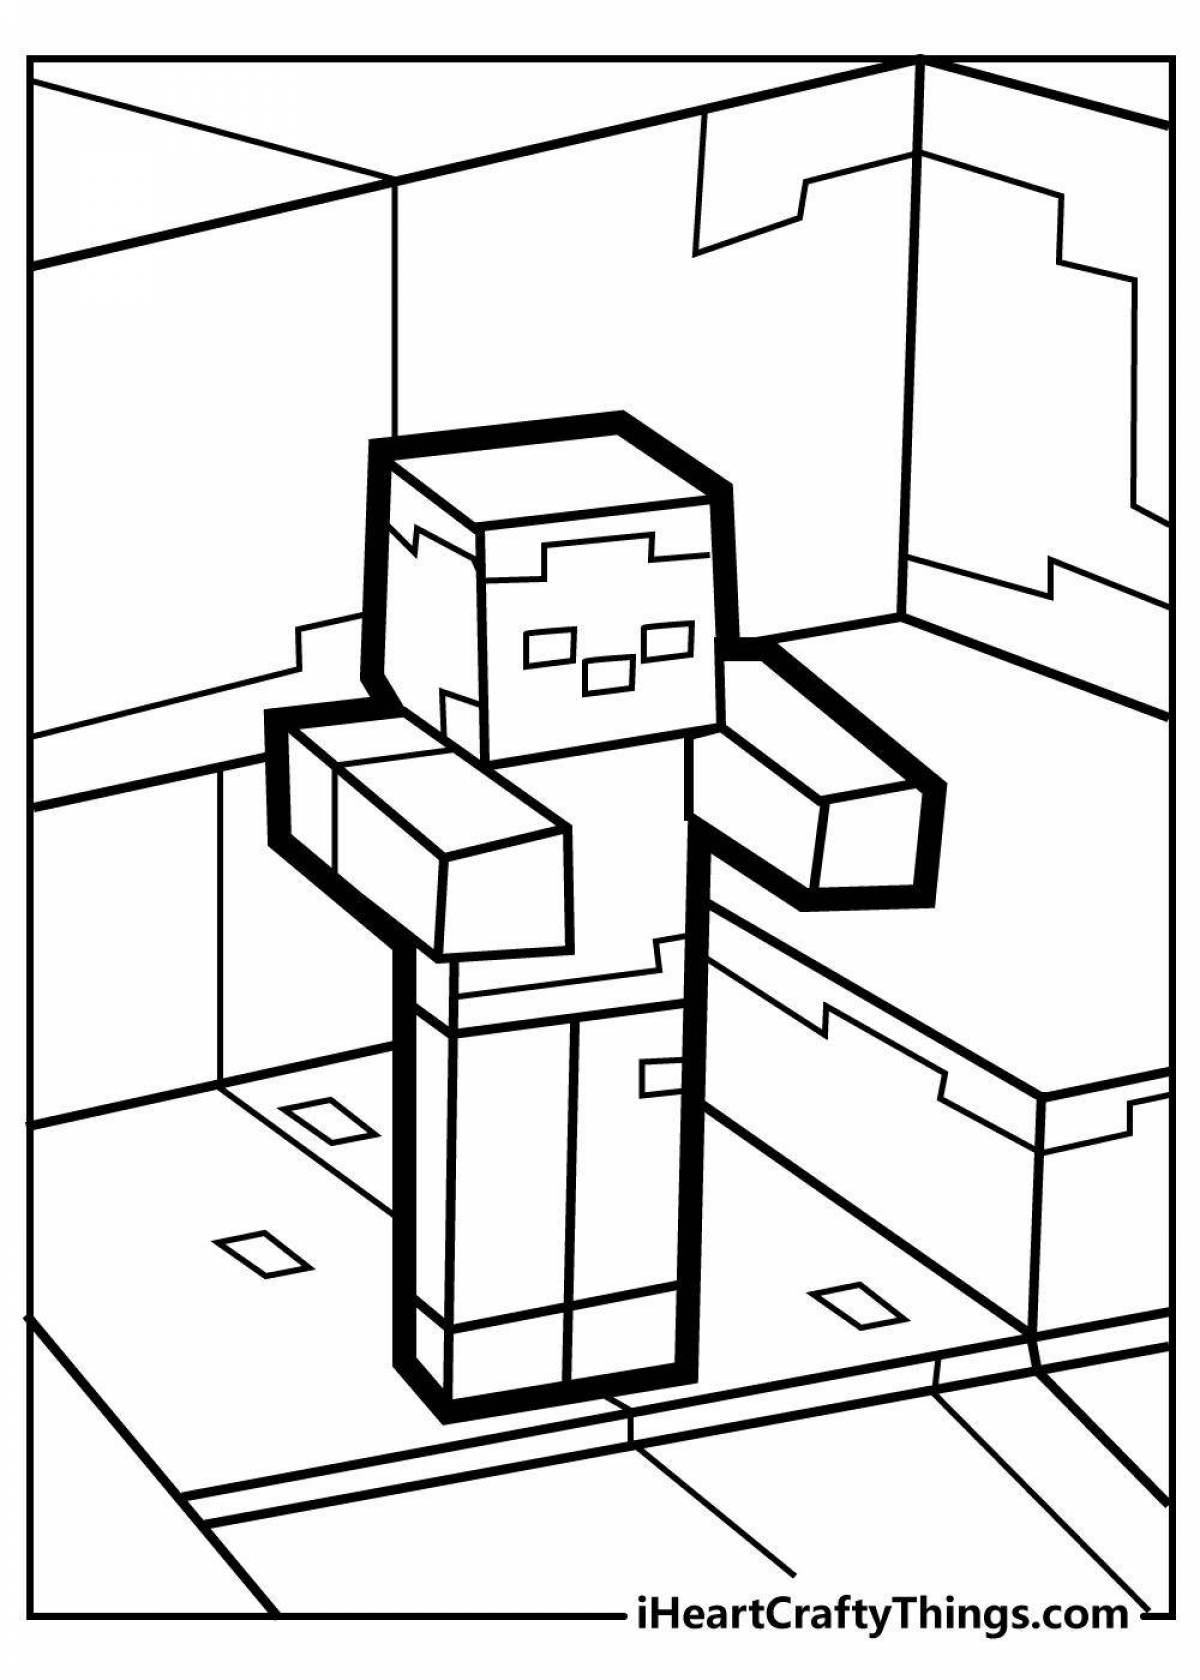 Amazing minecraft bunny coloring page